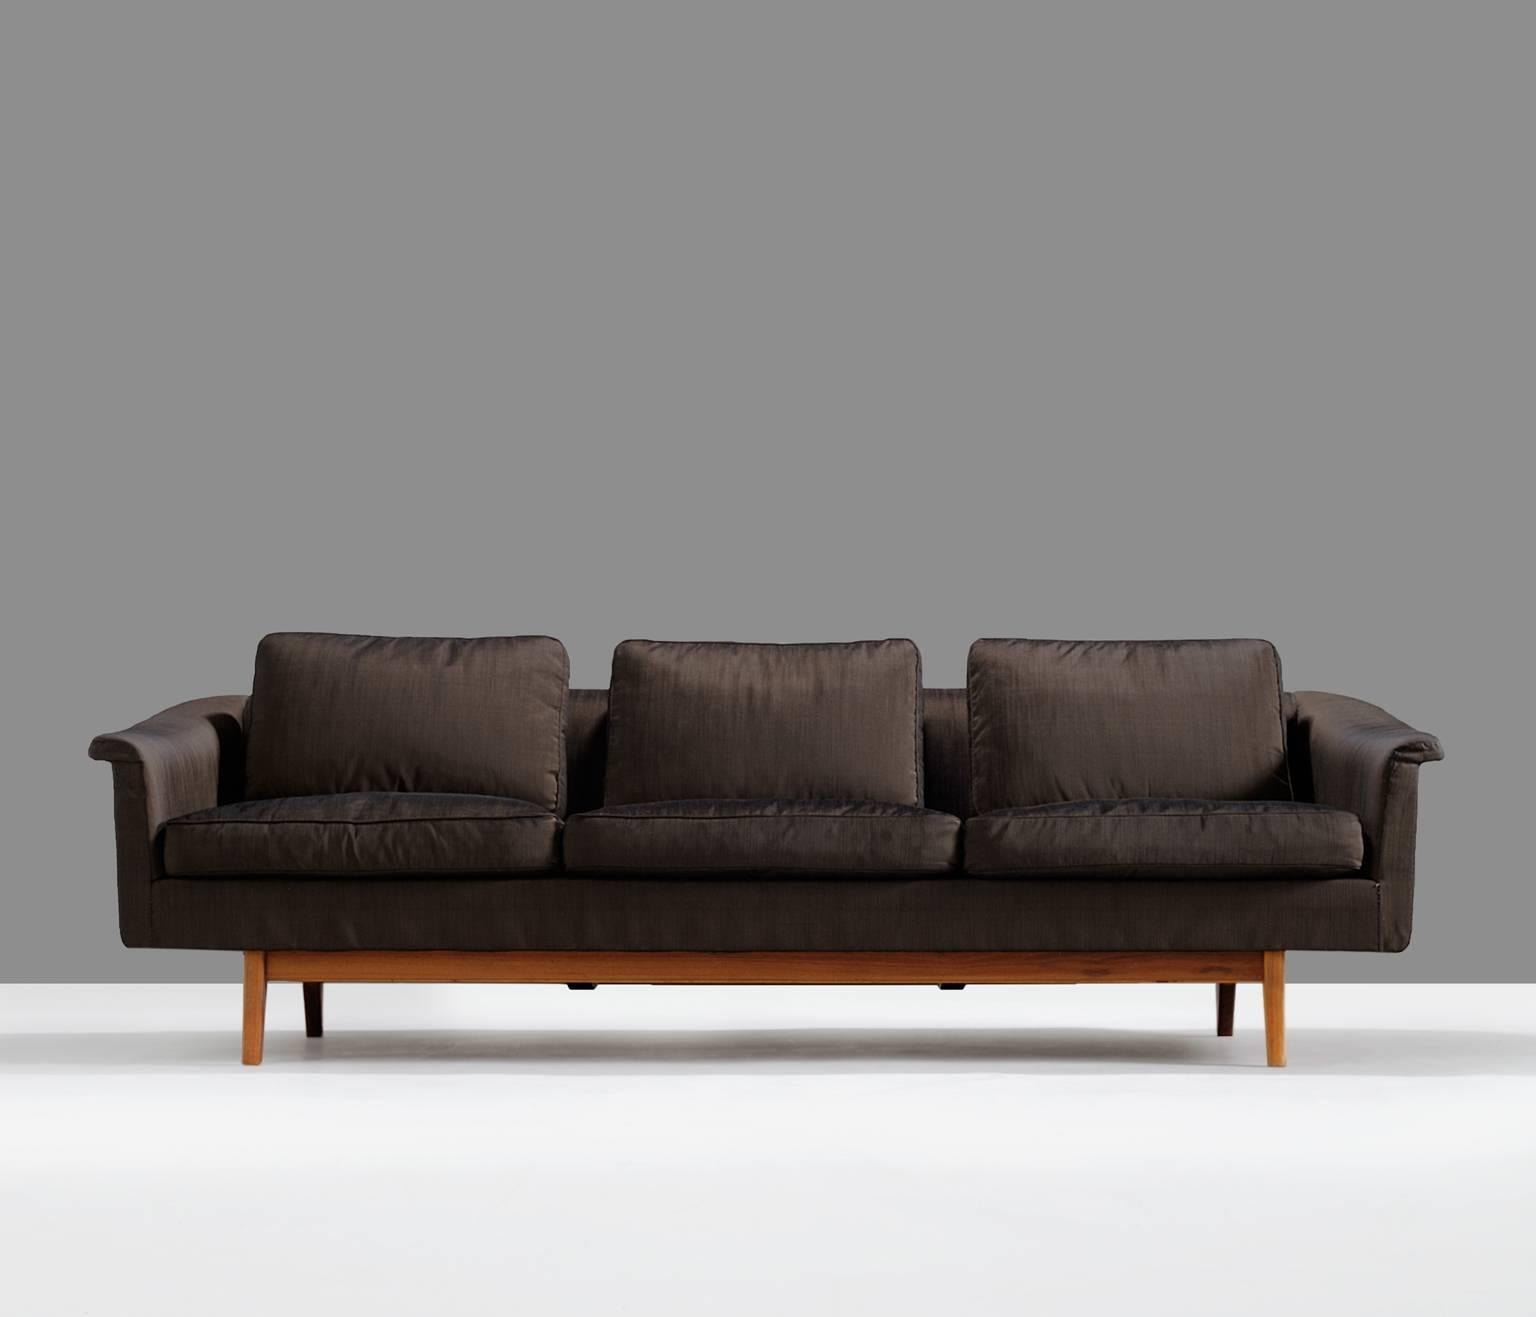 Large three-seat sofa in original fabric by Folke Ohlsson for DUX, Sweden, 1950s.

The proportions of this luxurious three-seat sofa are remarkable. The way the horizontal back gently flows smoothly downwards, is both beautiful and comfortable. The